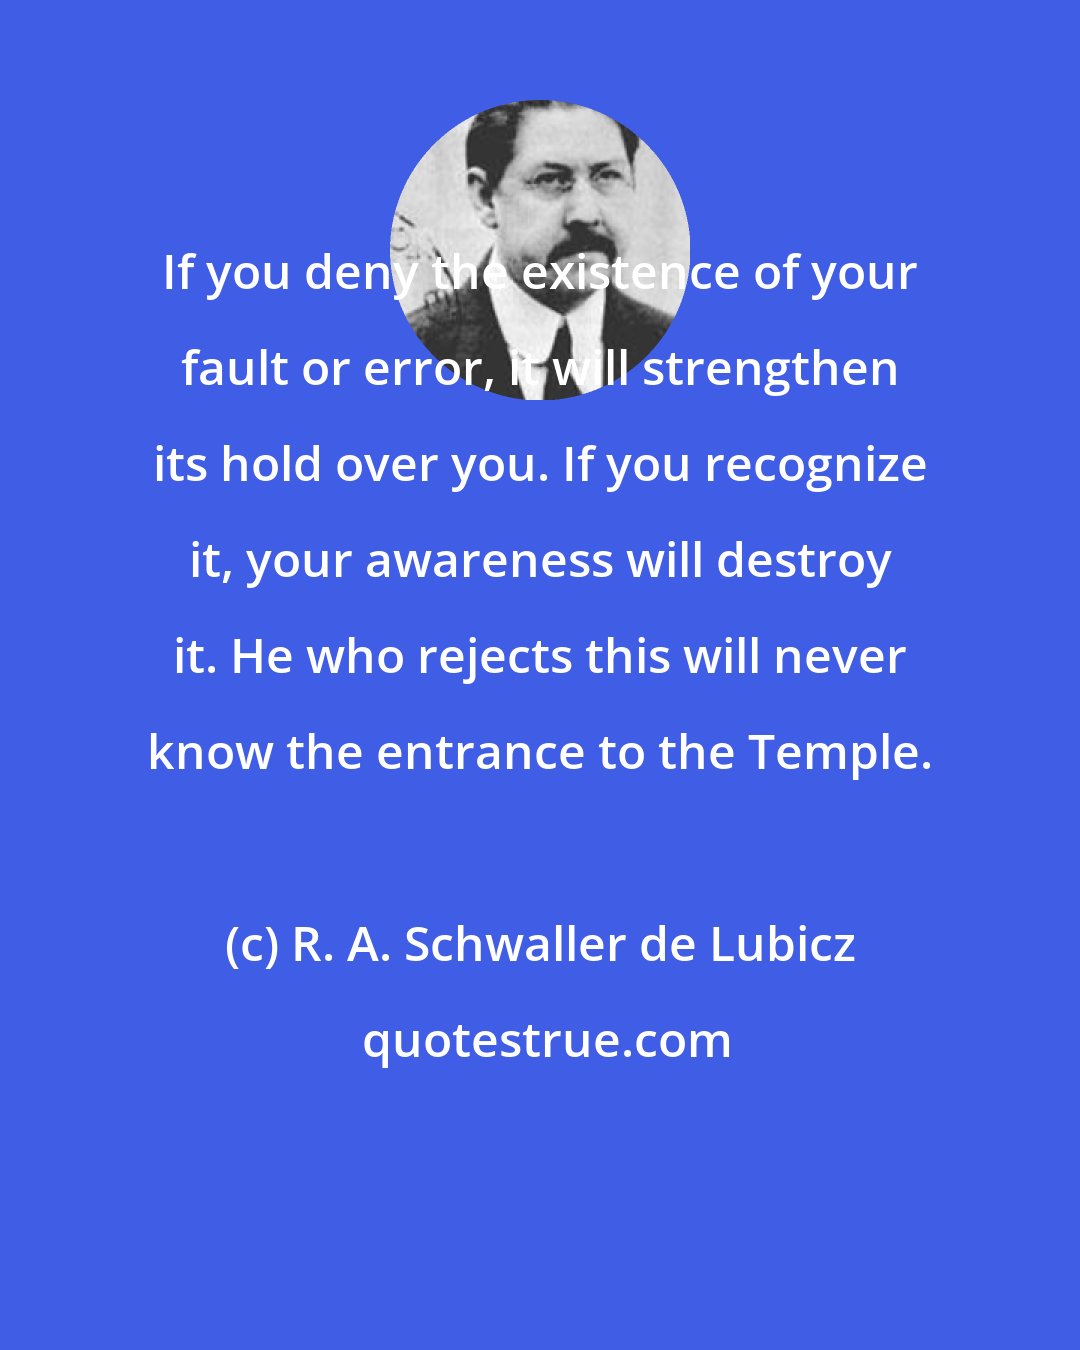 R. A. Schwaller de Lubicz: If you deny the existence of your fault or error, it will strengthen its hold over you. If you recognize it, your awareness will destroy it. He who rejects this will never know the entrance to the Temple.